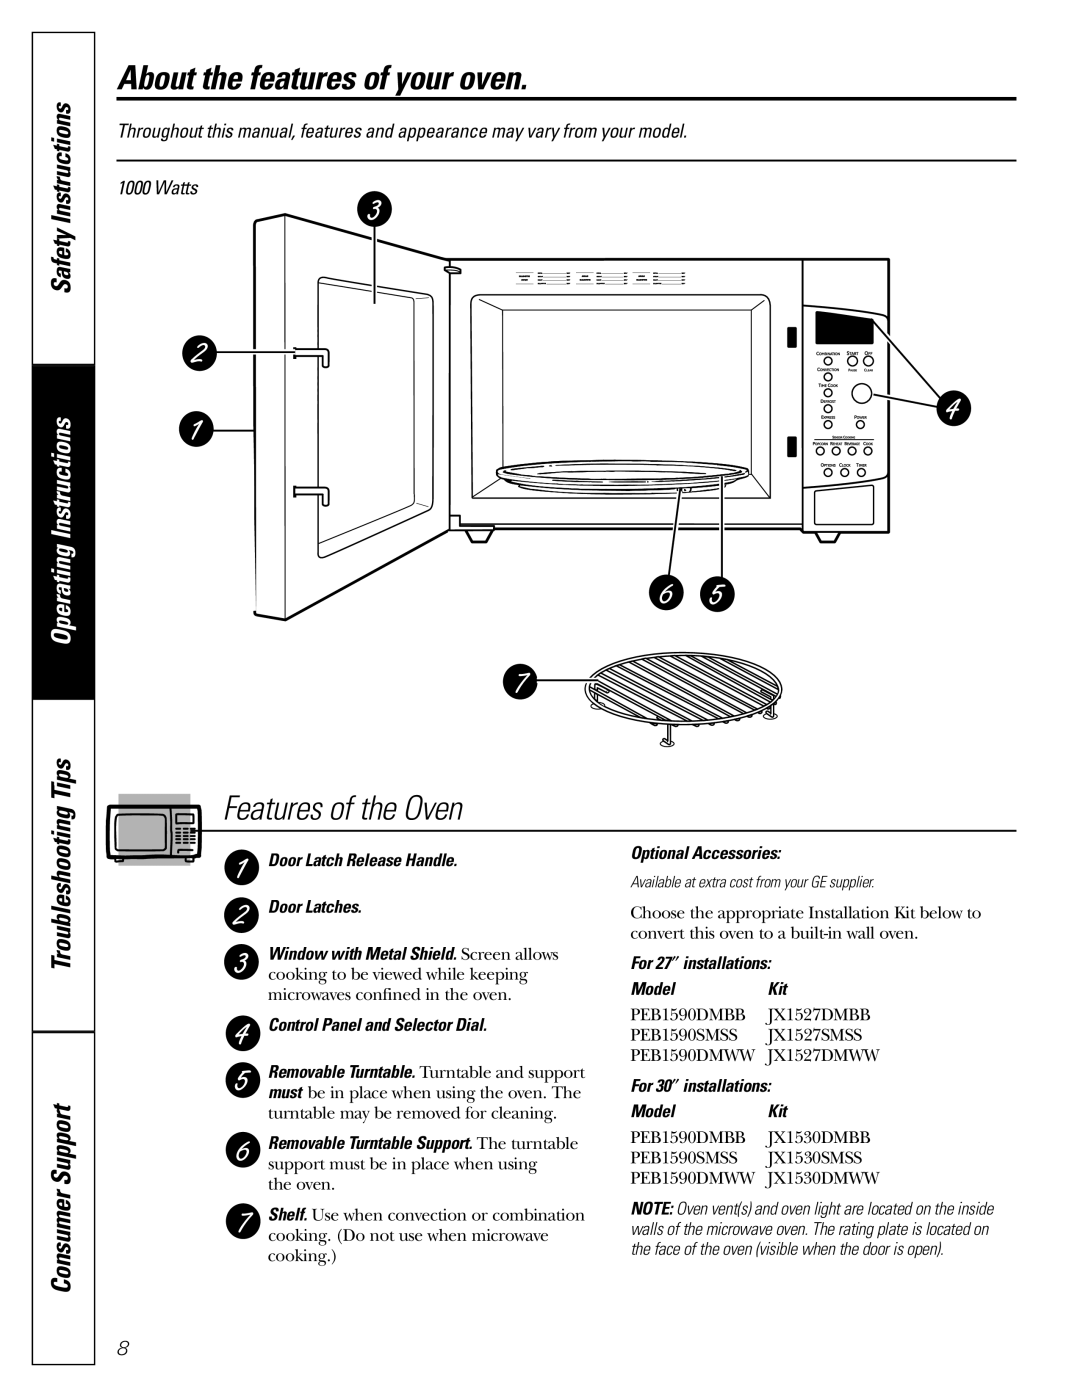 GE PEB1590 About the features of your oven, Features of the Oven, Safety Instructions, Operating Instructions, Watts 